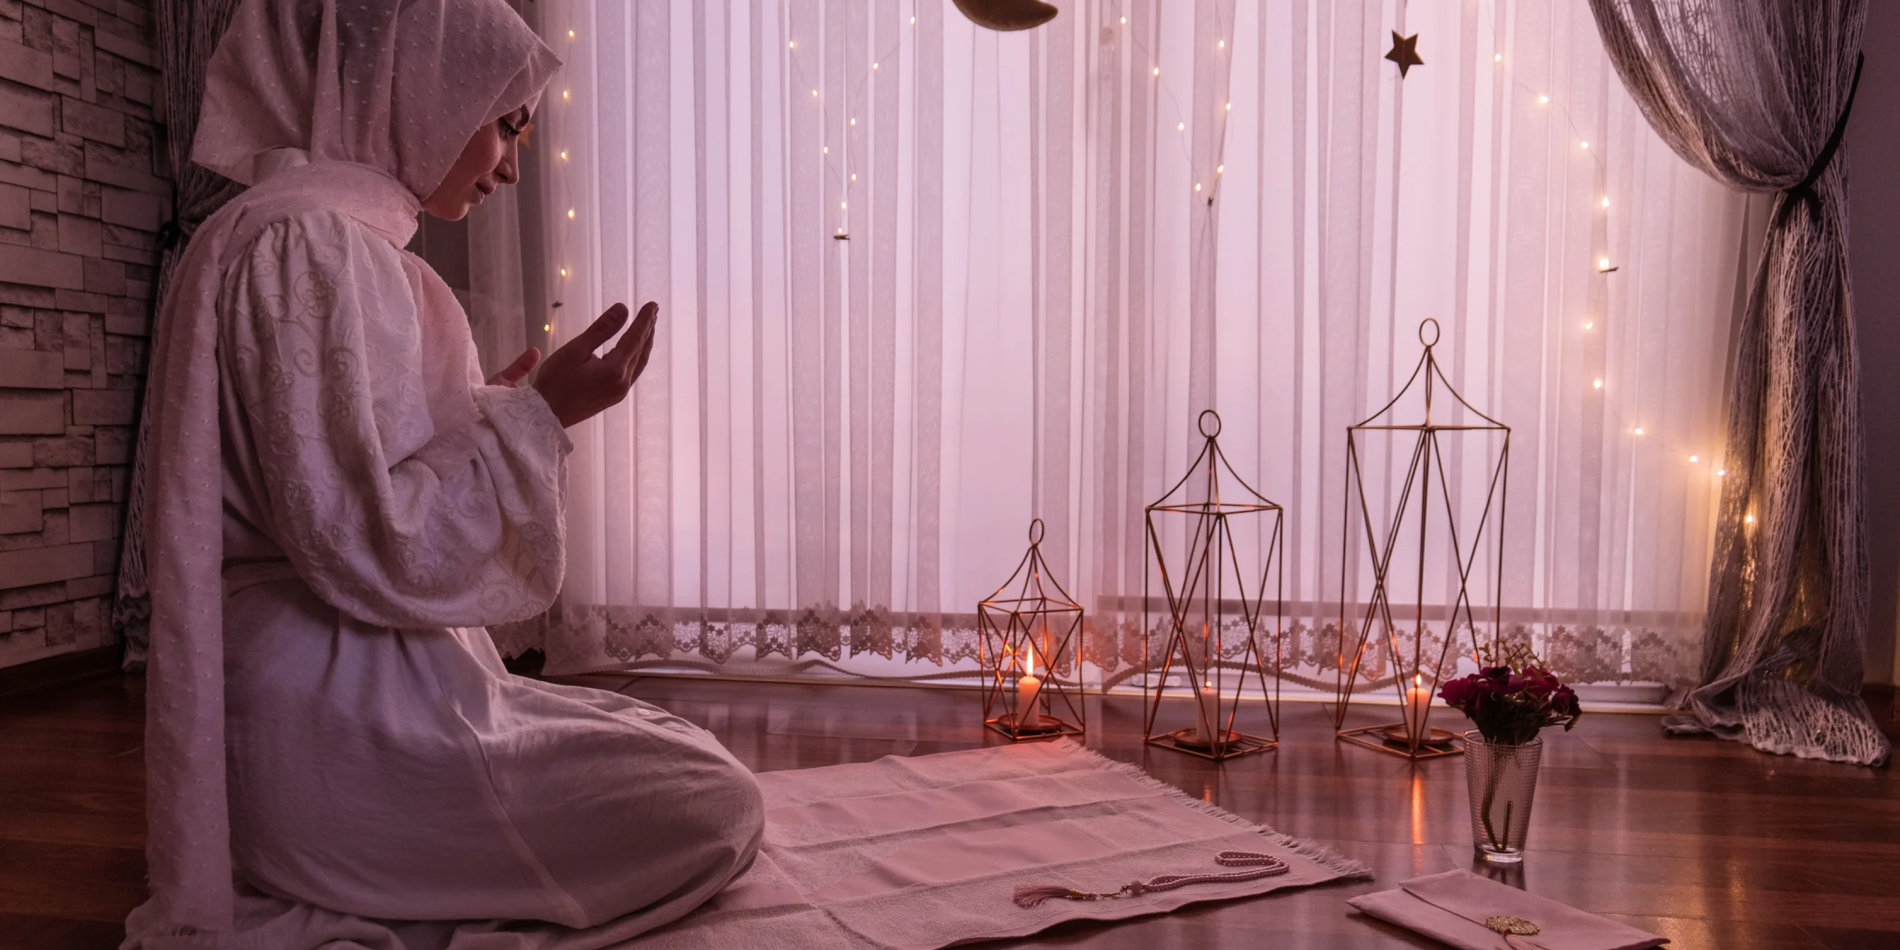 young Muslim woman praying in decorated space